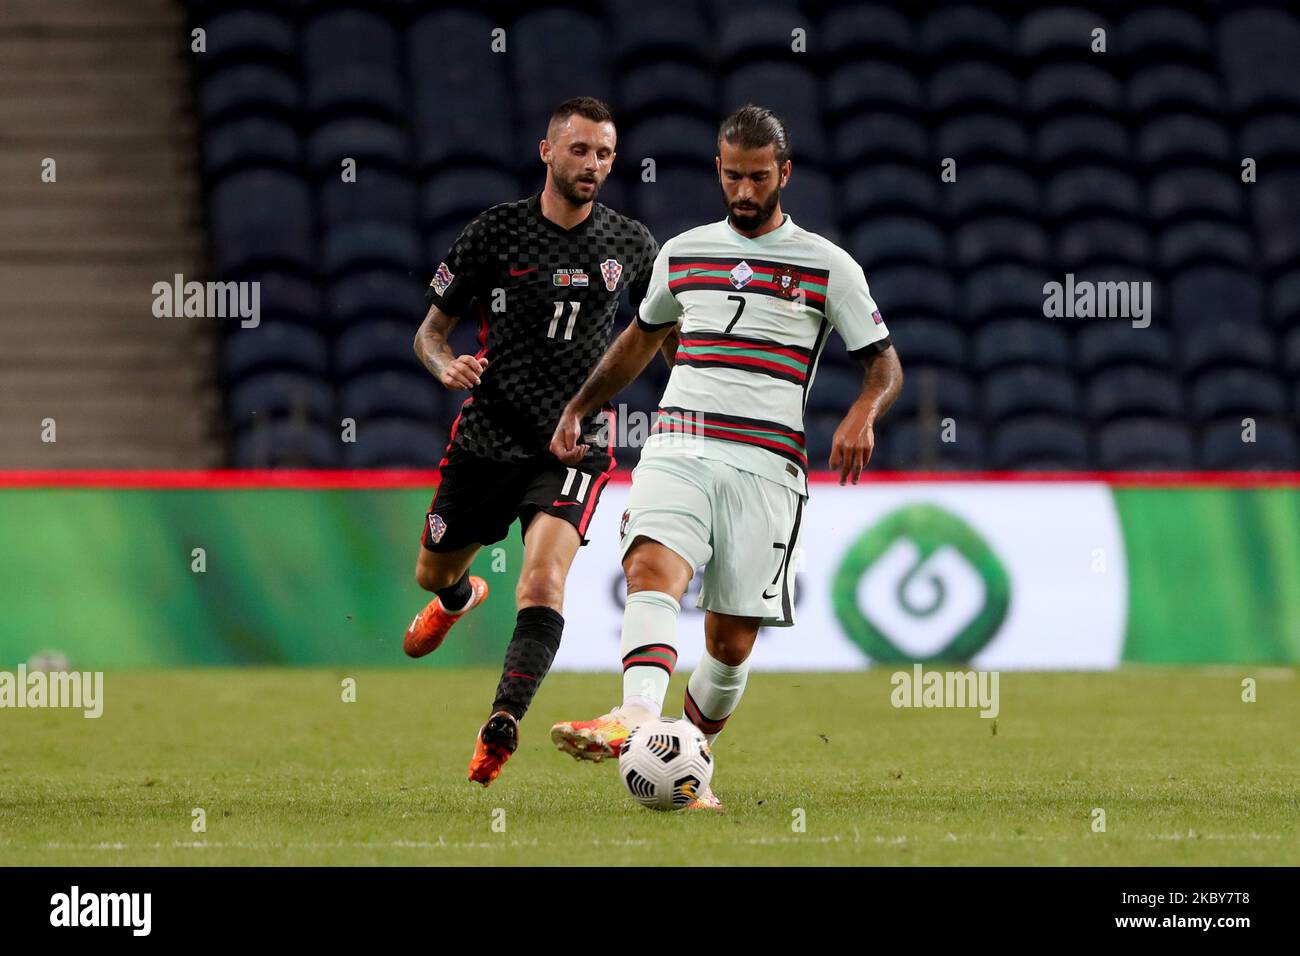 Sergio Oliveira of Portugal (R ) vies with Marcelo Brozovic of Croatia during the UEFA Nations League group stage football match between Portugal and Croatia at the Dragao stadium in Porto, Portugal on September 5, 2020. (Photo by Pedro FiÃºza/NurPhoto) Stock Photo